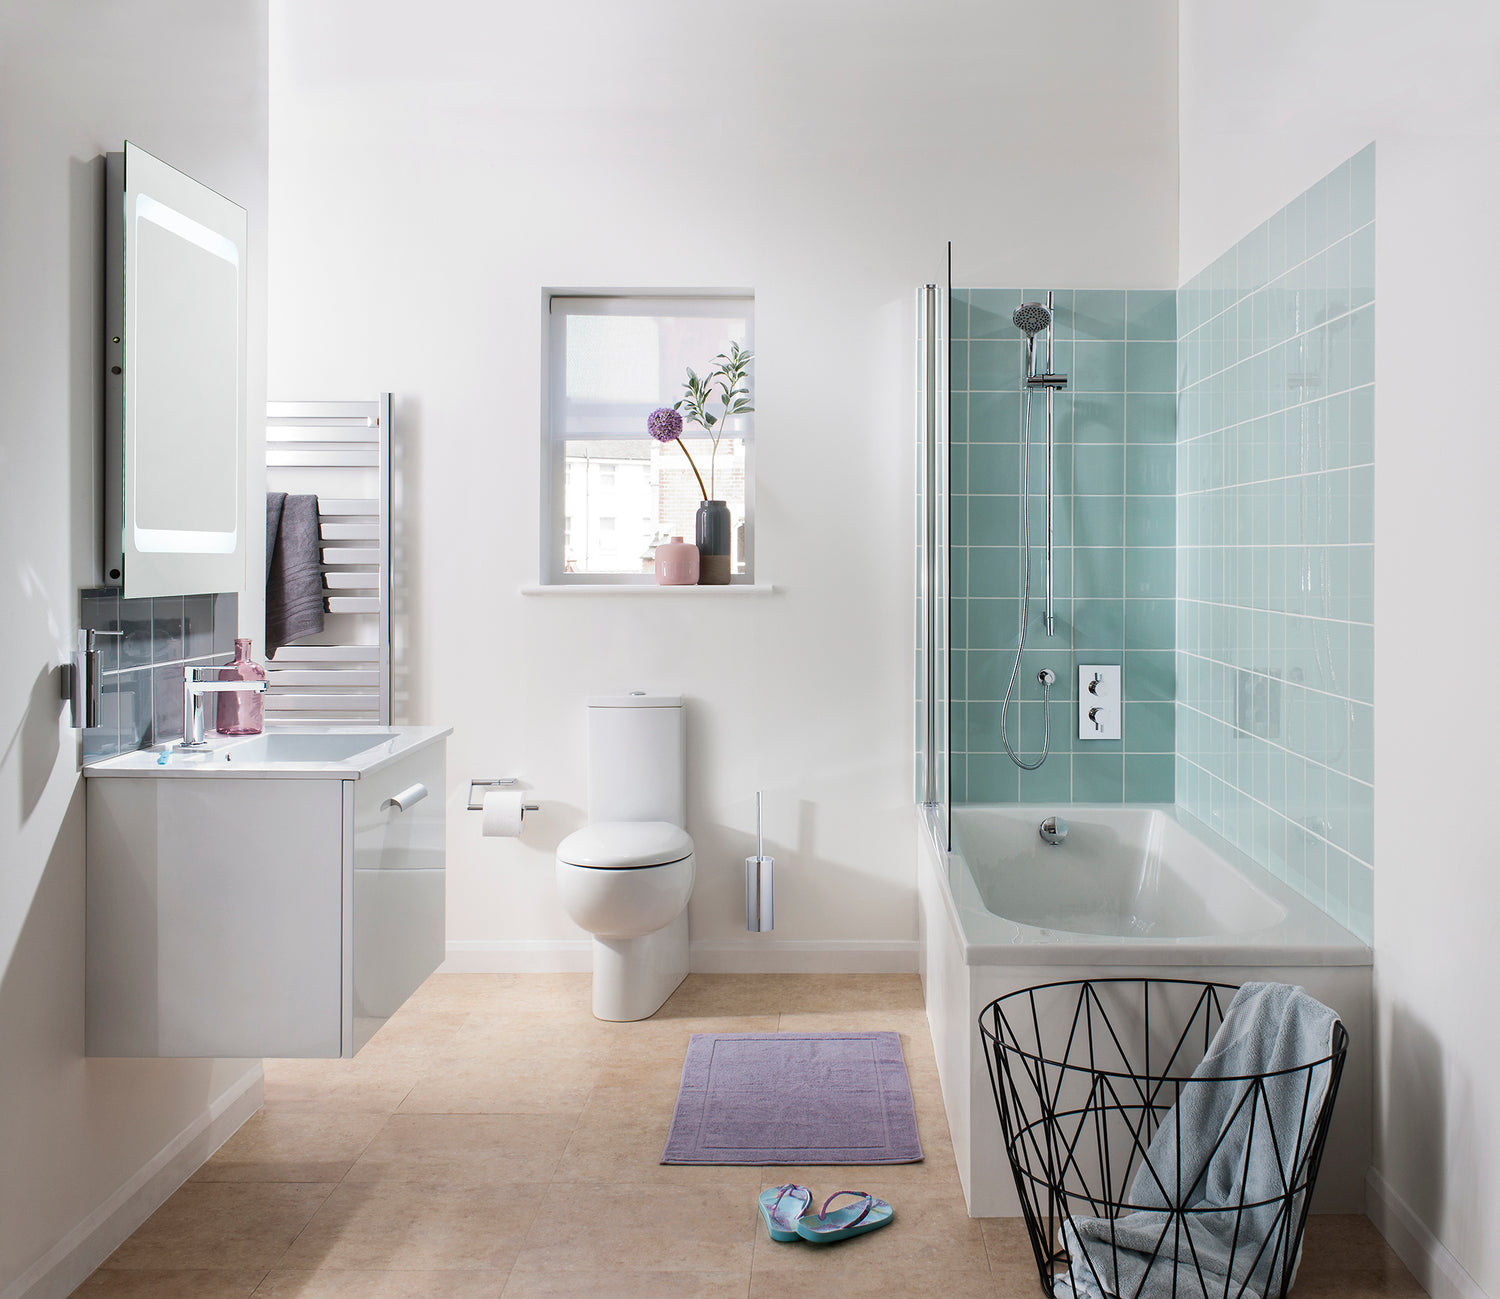 Product Guides - Beautiful Bathrooms From The West Country